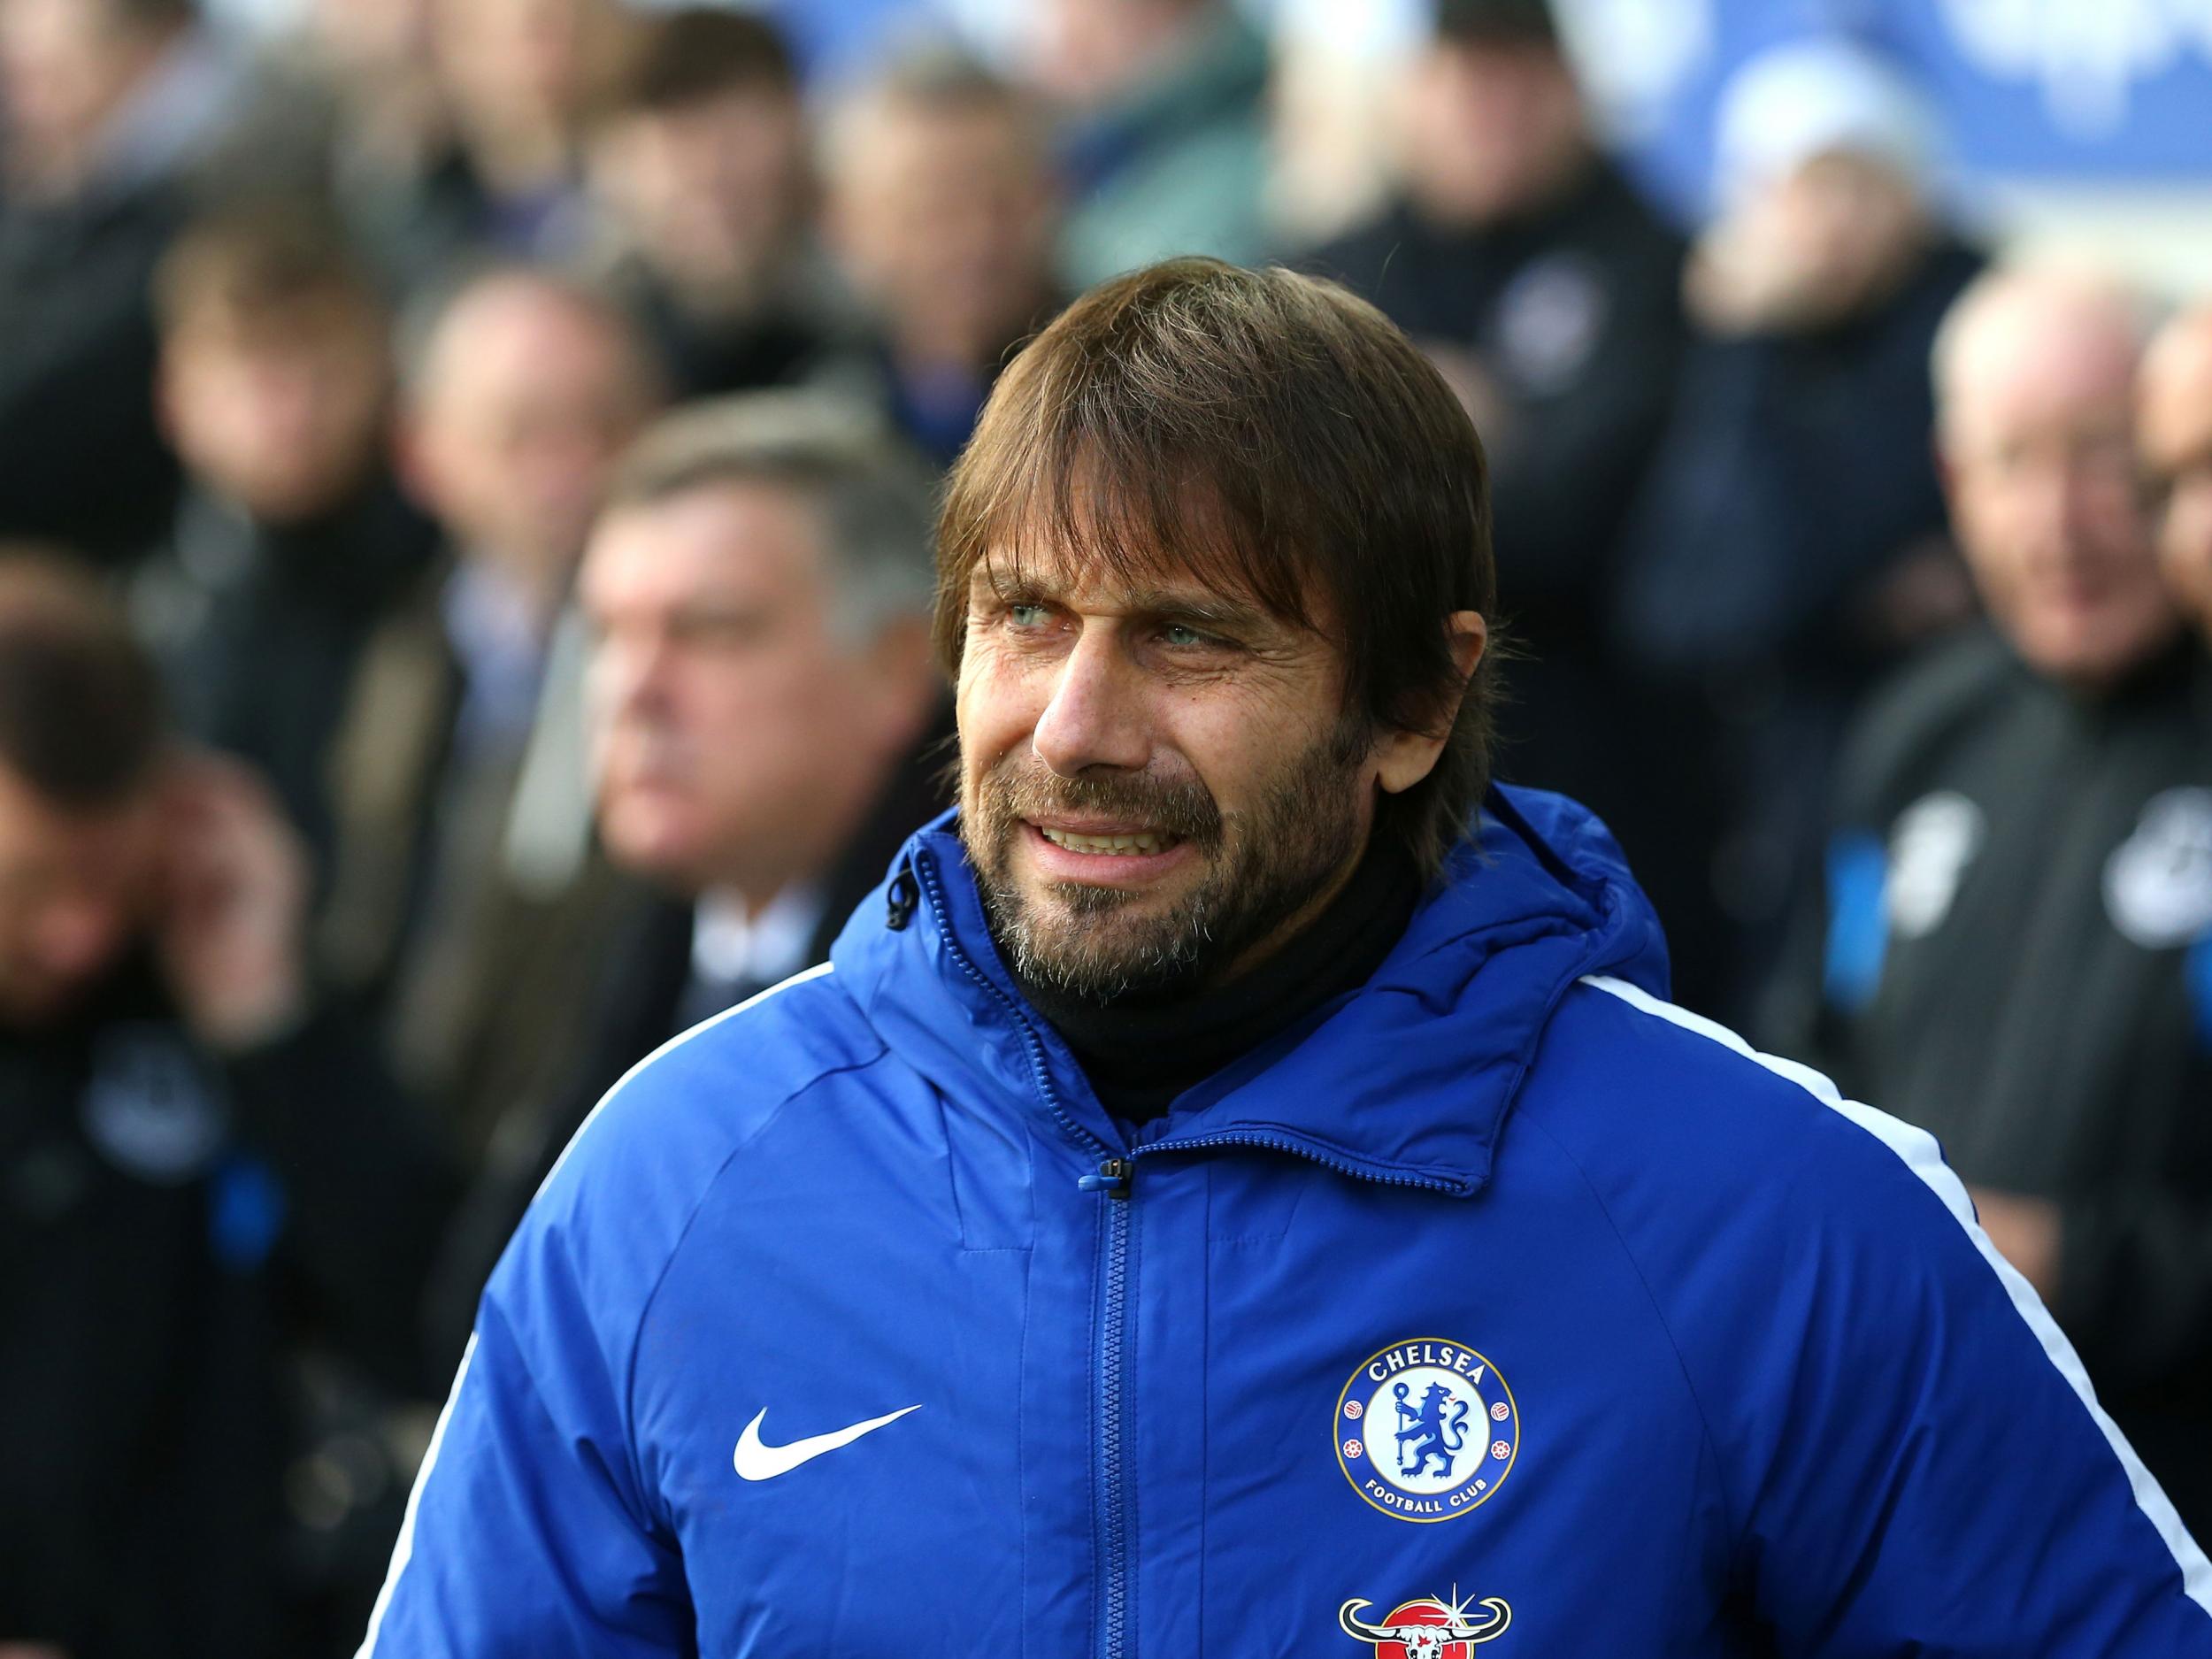 Antonio Conte has urged his men to keep fighting - no matter how futile it may seem